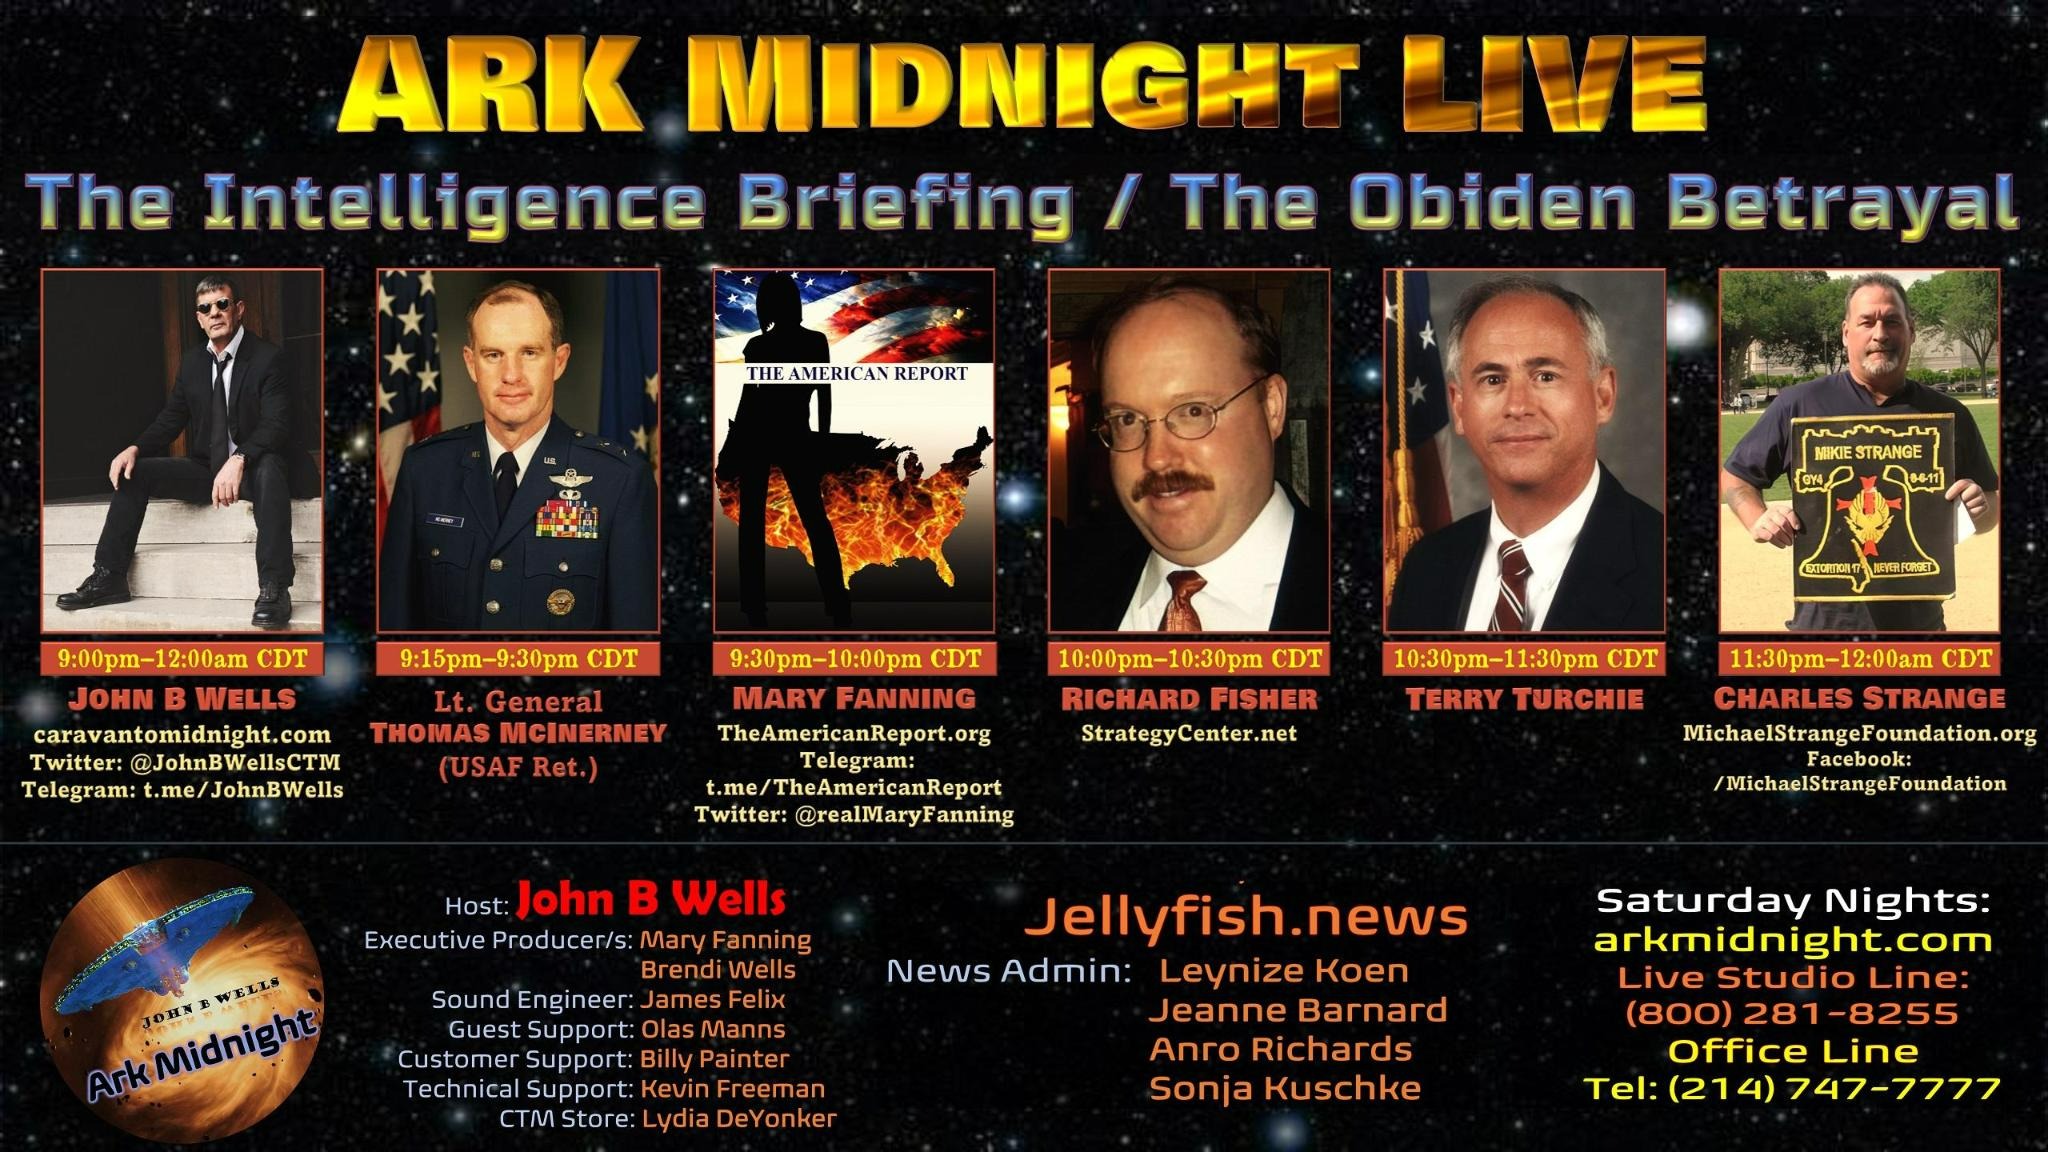 Tonight on Ark Midnight - The Intelligence Briefing/Destroying Humanity and Killing Freedom